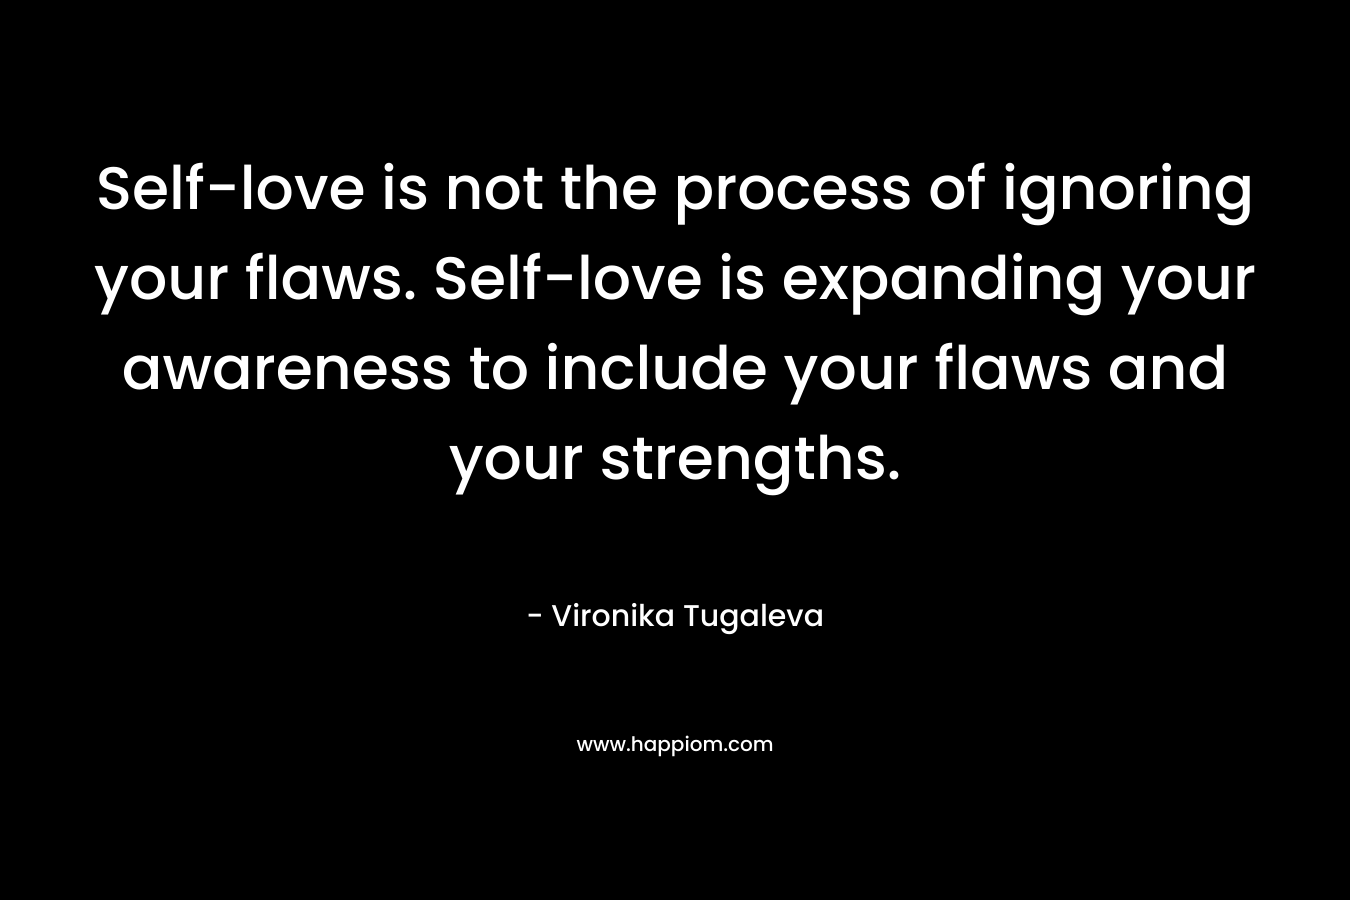 Self-love is not the process of ignoring your flaws. Self-love is expanding your awareness to include your flaws and your strengths. – Vironika Tugaleva